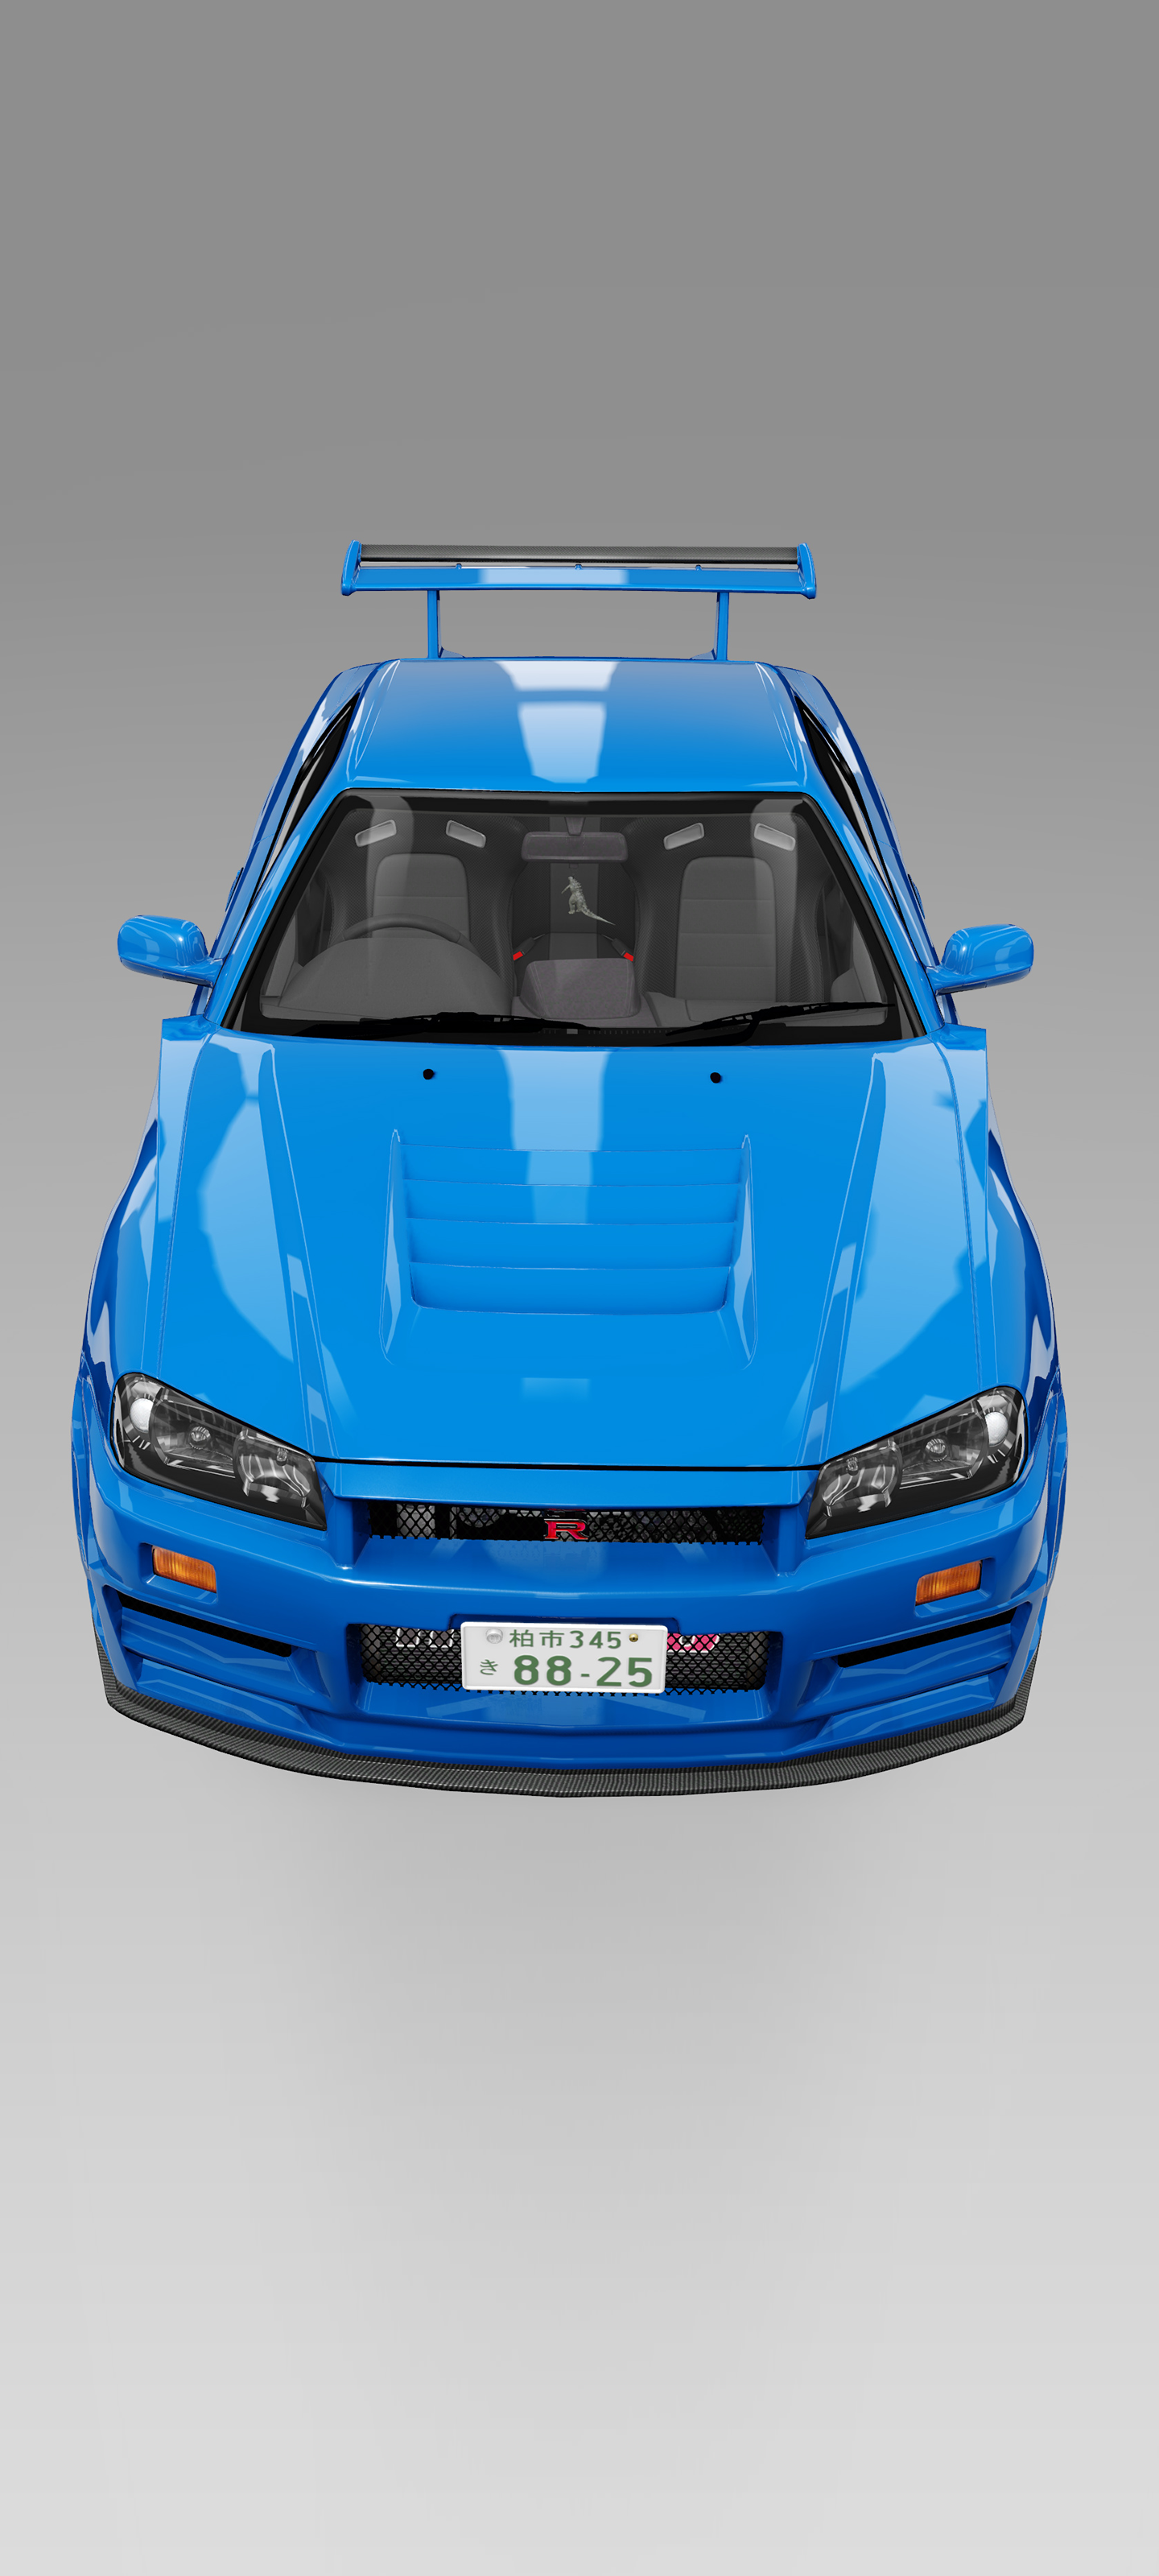 General 1440x3200 Nissan numbers car vehicle blue cars Nissan Skyline Nissan Skyline R34 Japanese cars